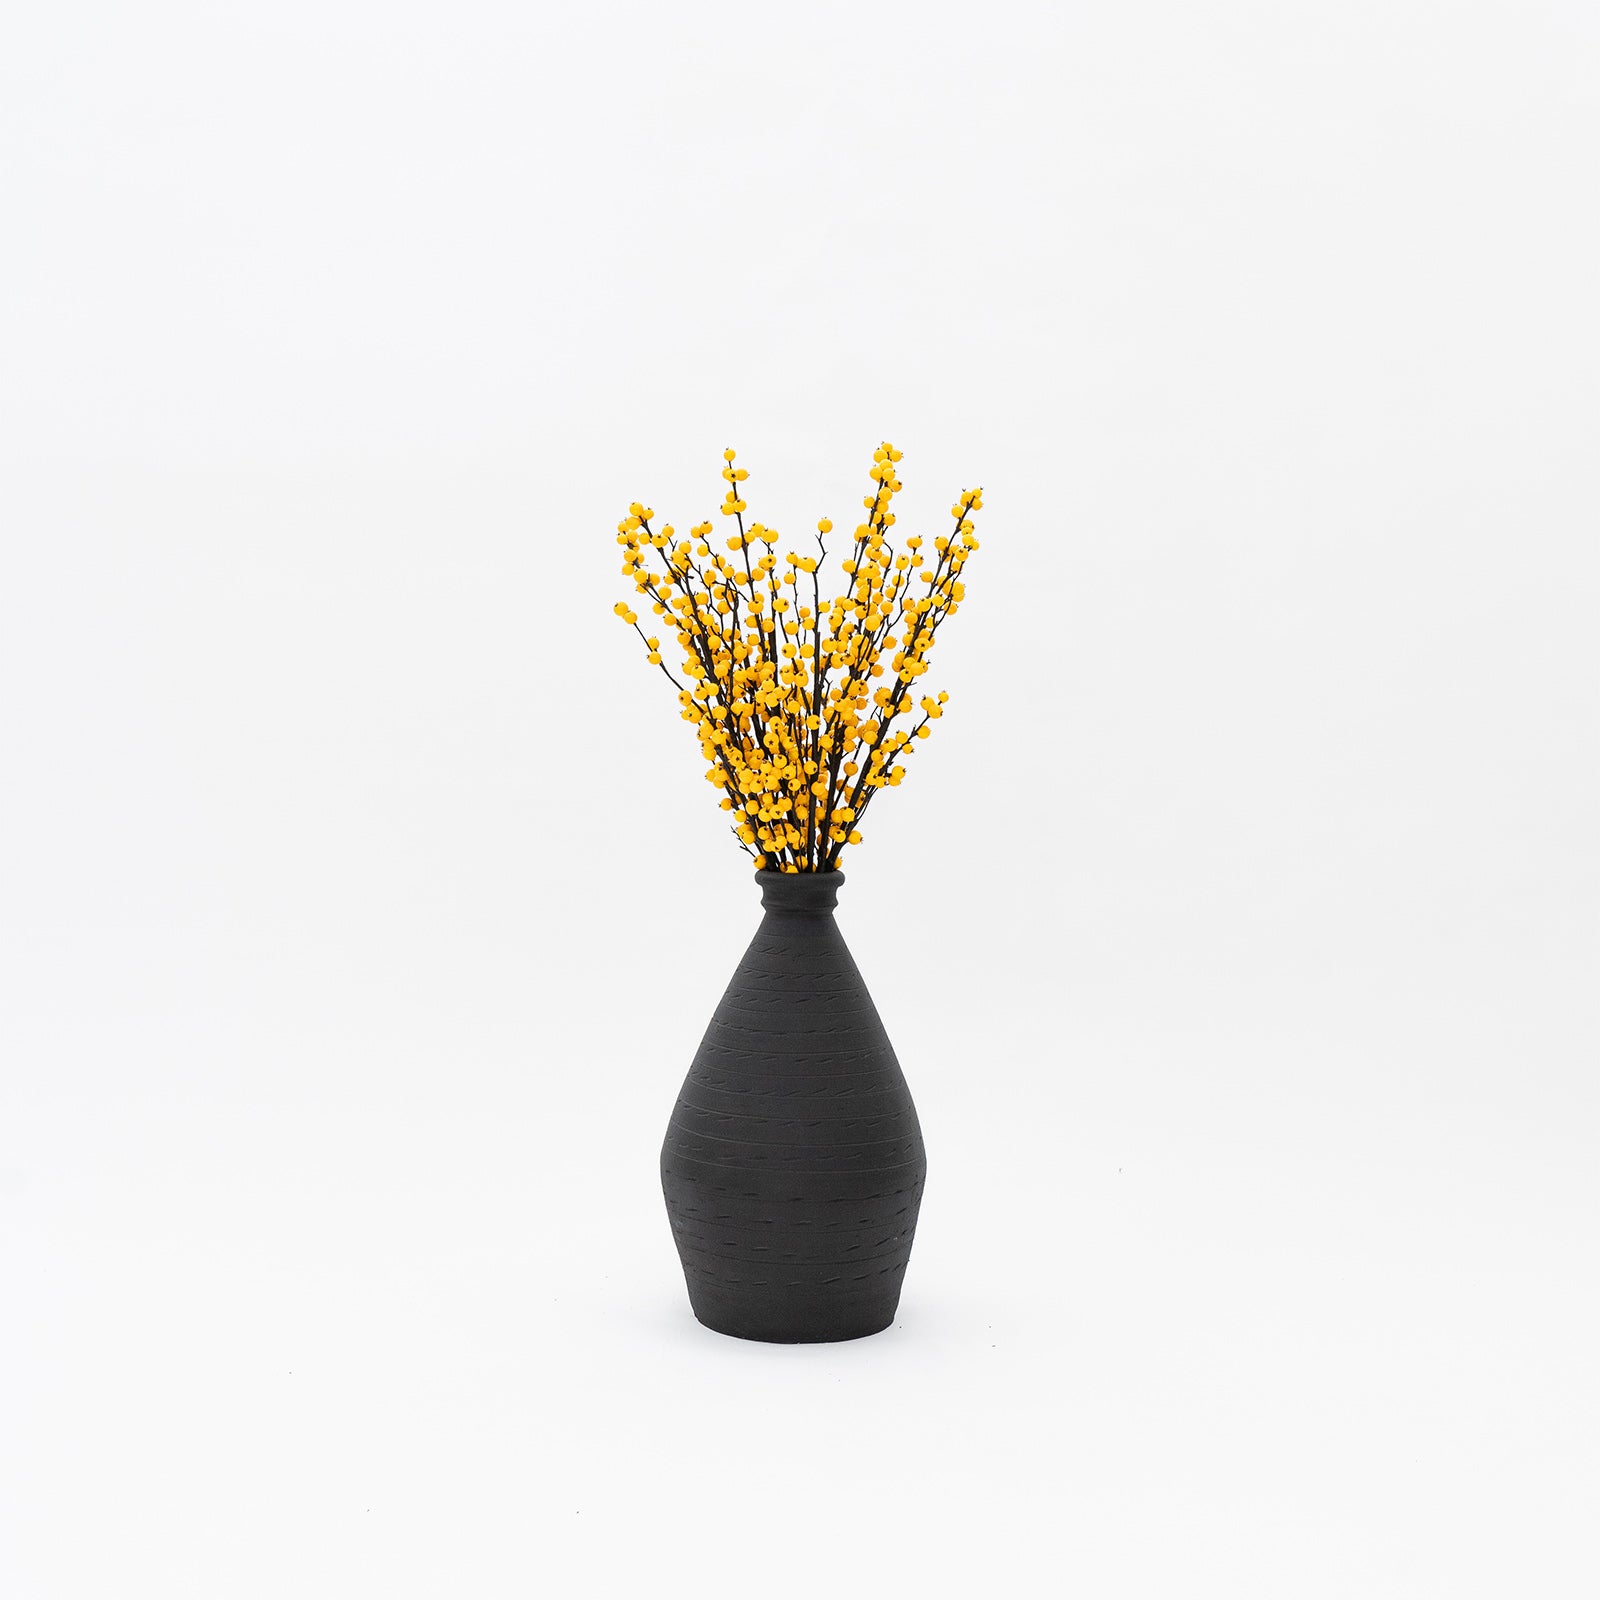 Artificial Plant - Hawthorn Berry Yellow  - WS Living - UAE - Artificial Flowers Wood and steel Furnitures - Dubai